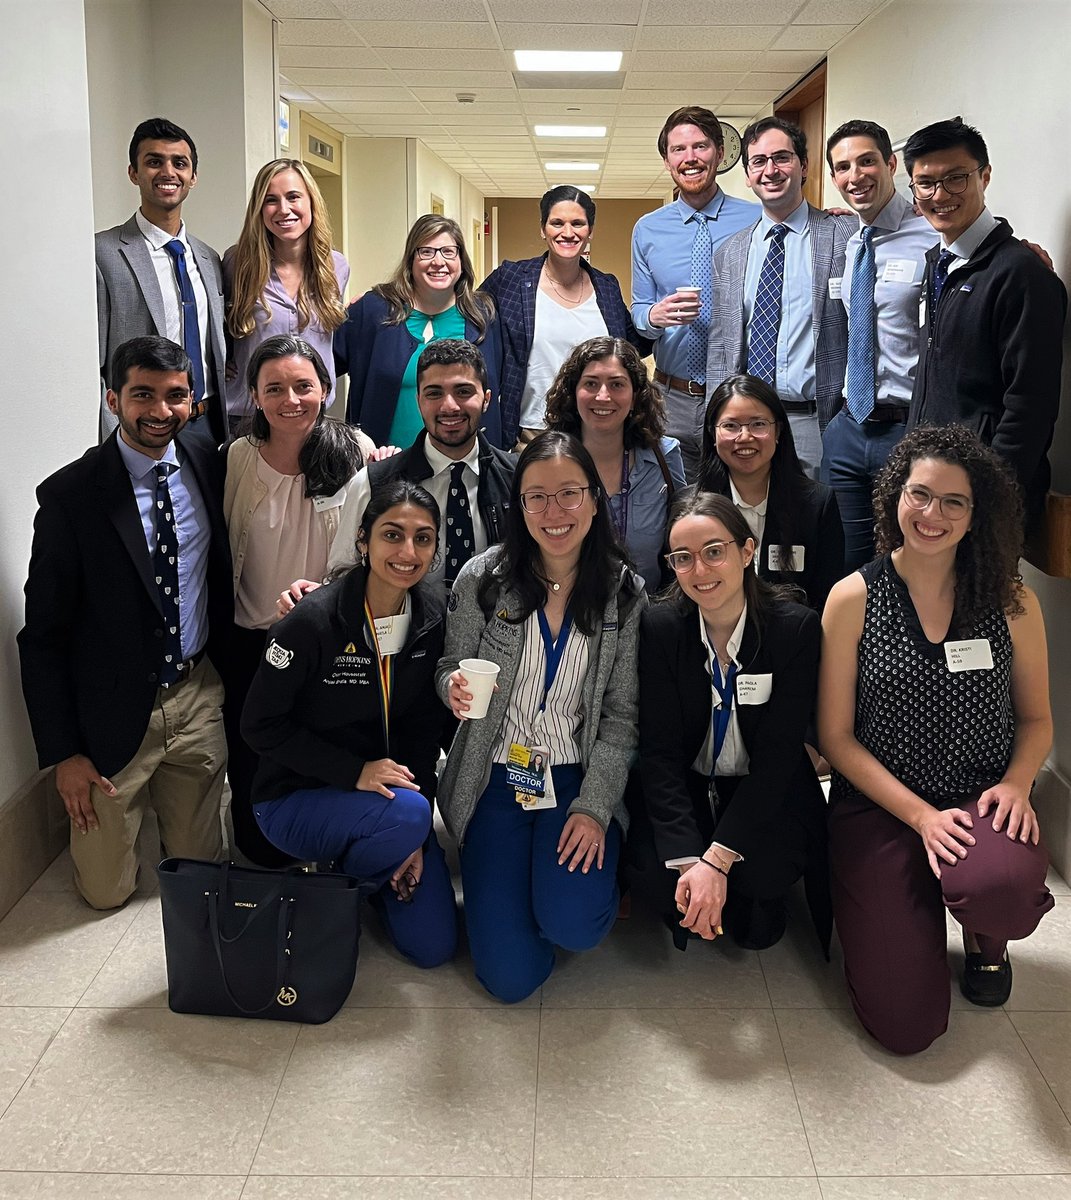 An amazing group of @OslerResidency residents representing at the @AcpMaryland annual resident's meeting. Posters, talks, competitions were had and #Oslerpride abounded!